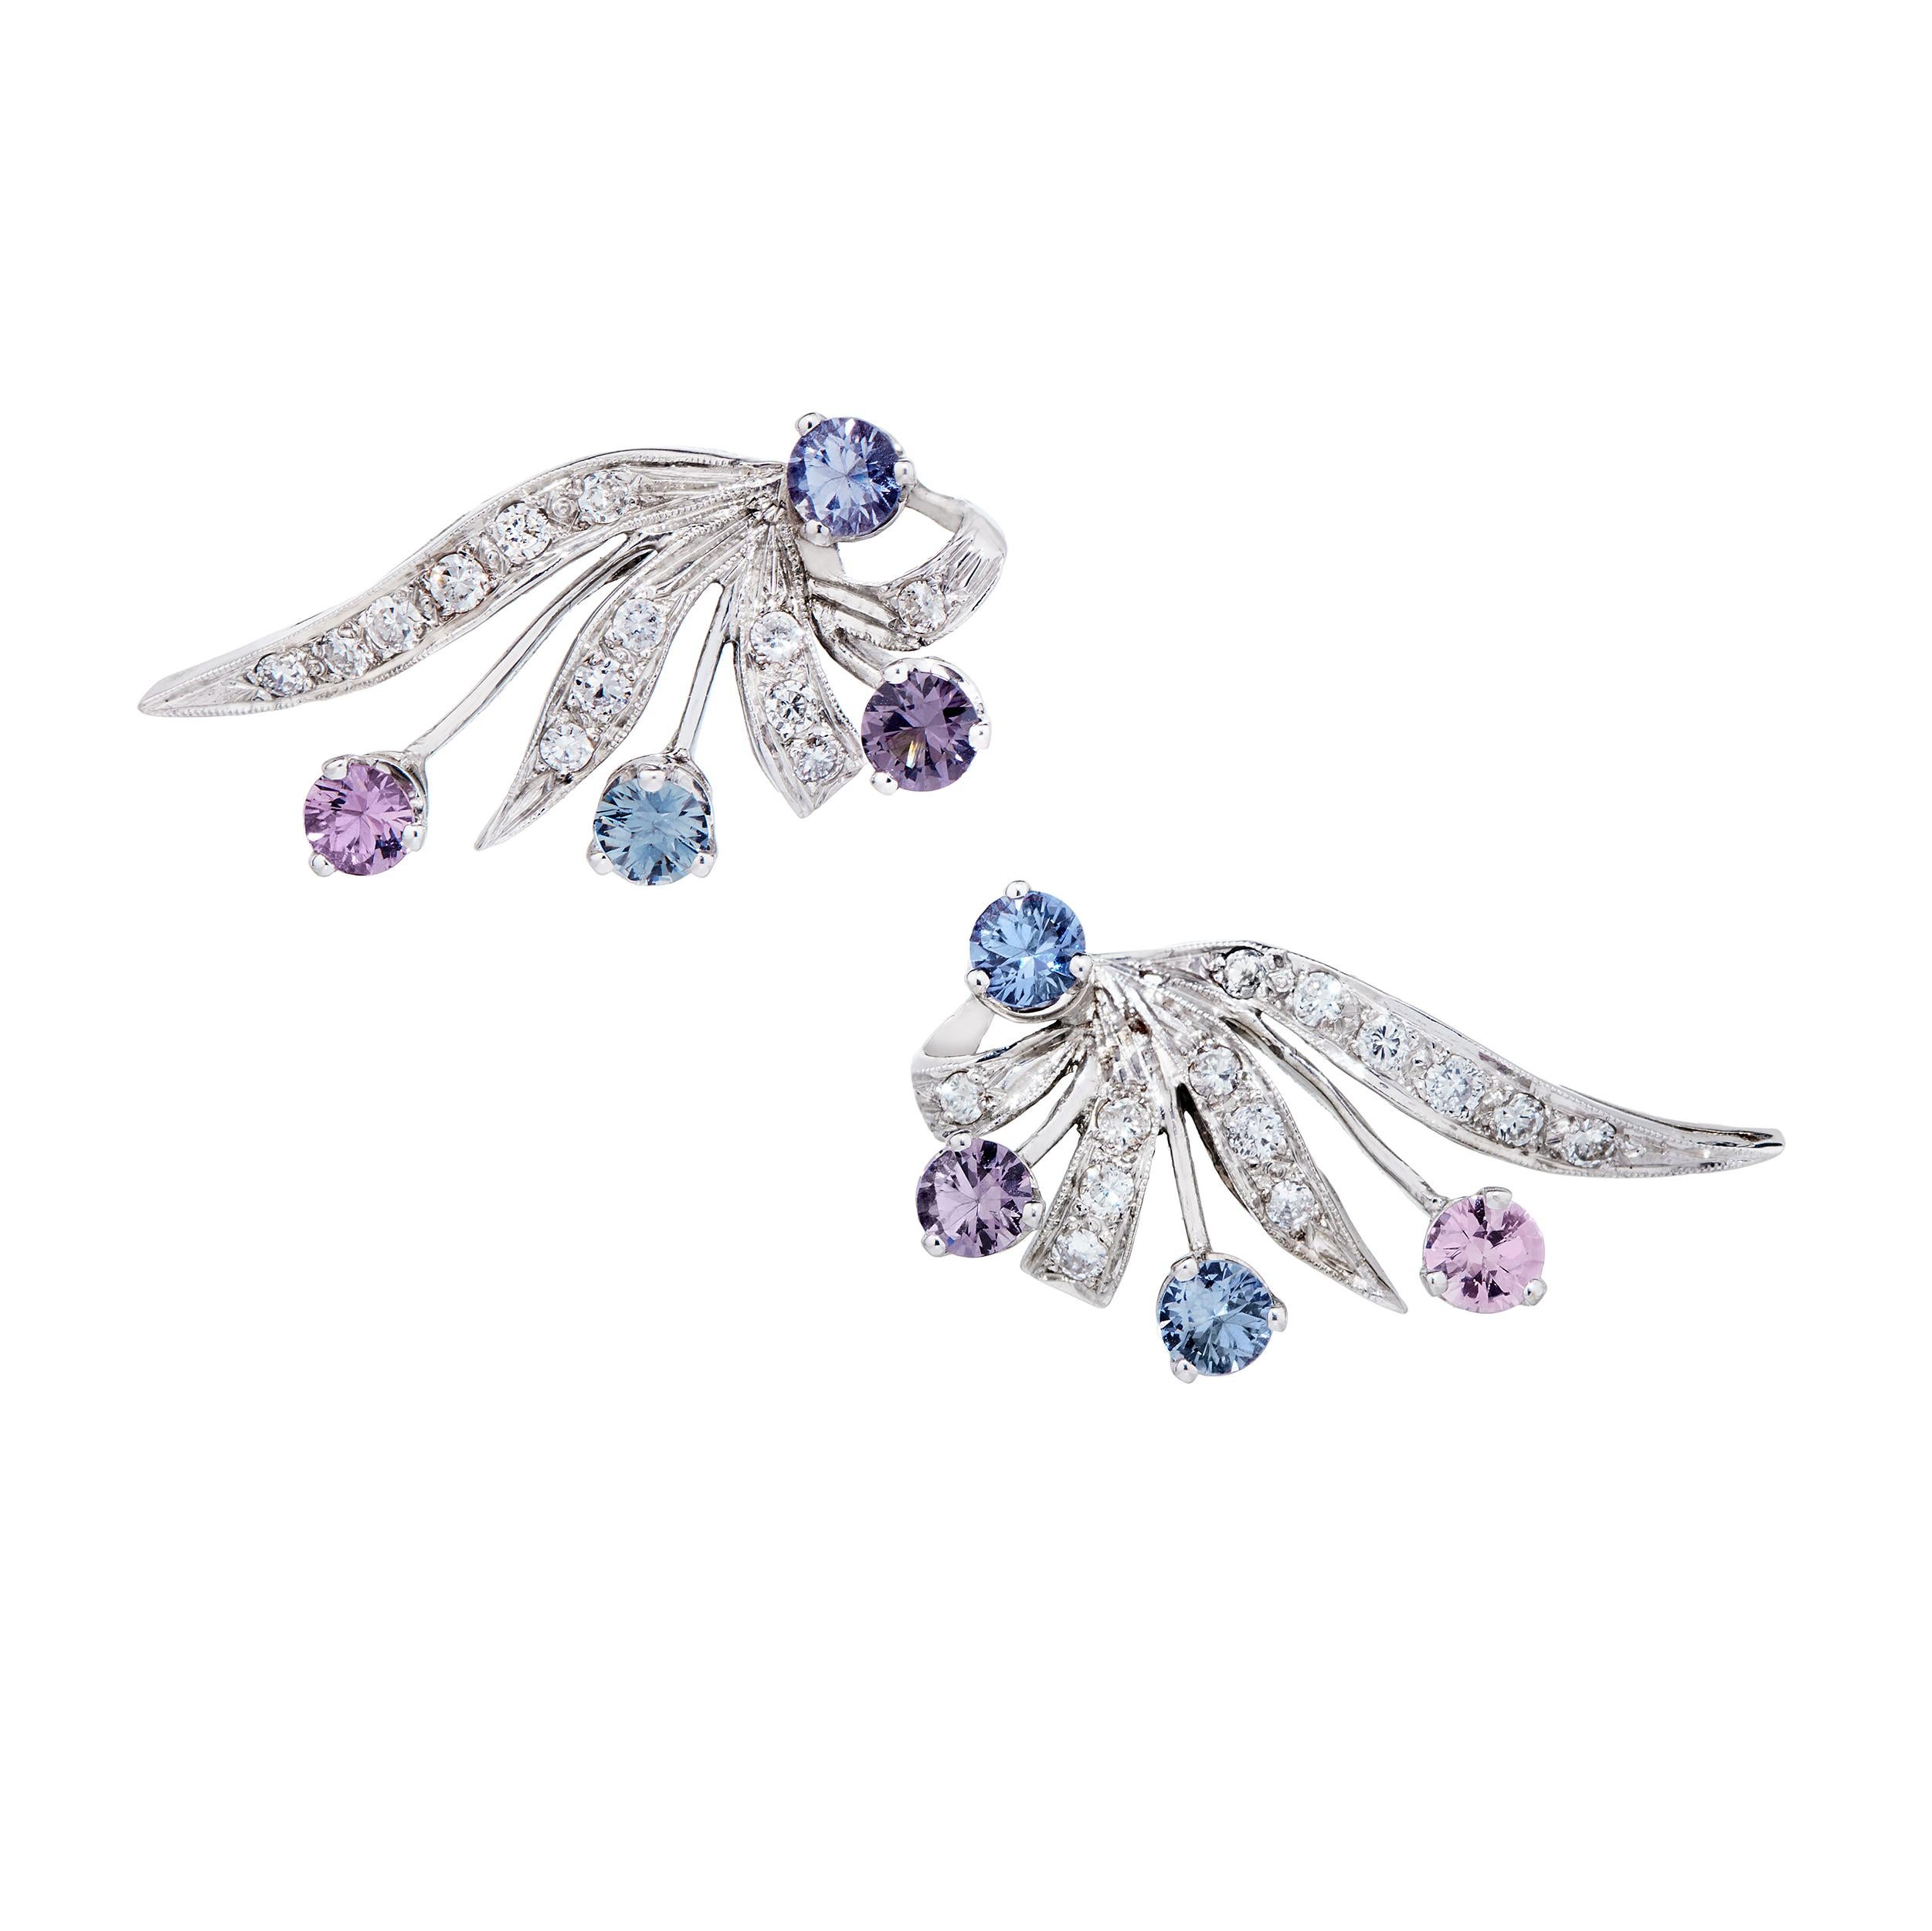 These vintage earrings have been brought to new life with the addition of soft shades of lavender Spinel peeking out from the Diamond leaves.  The earrings can be worn straight up and down, OR my personal preference, as a climber up the ear.  It's a